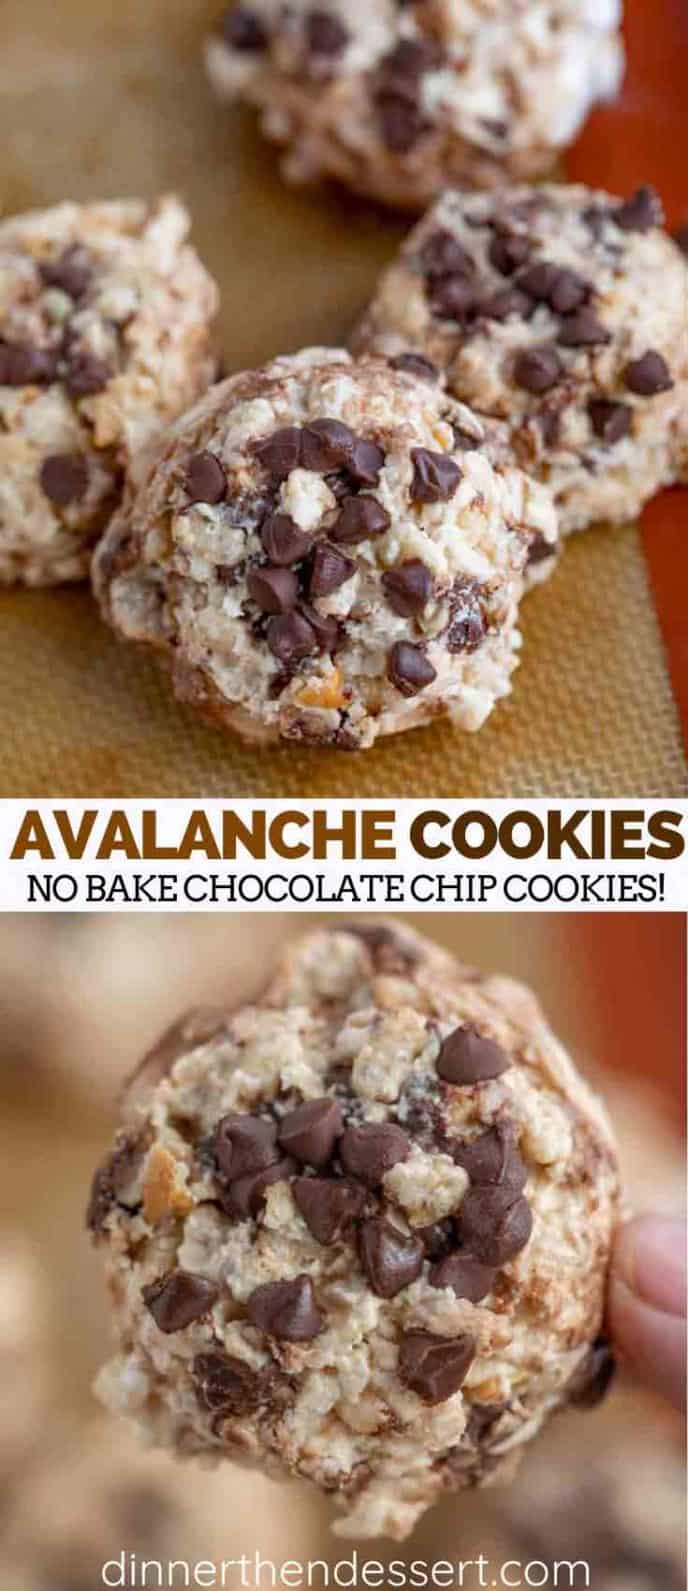 Avalanche Cookies - No Bake